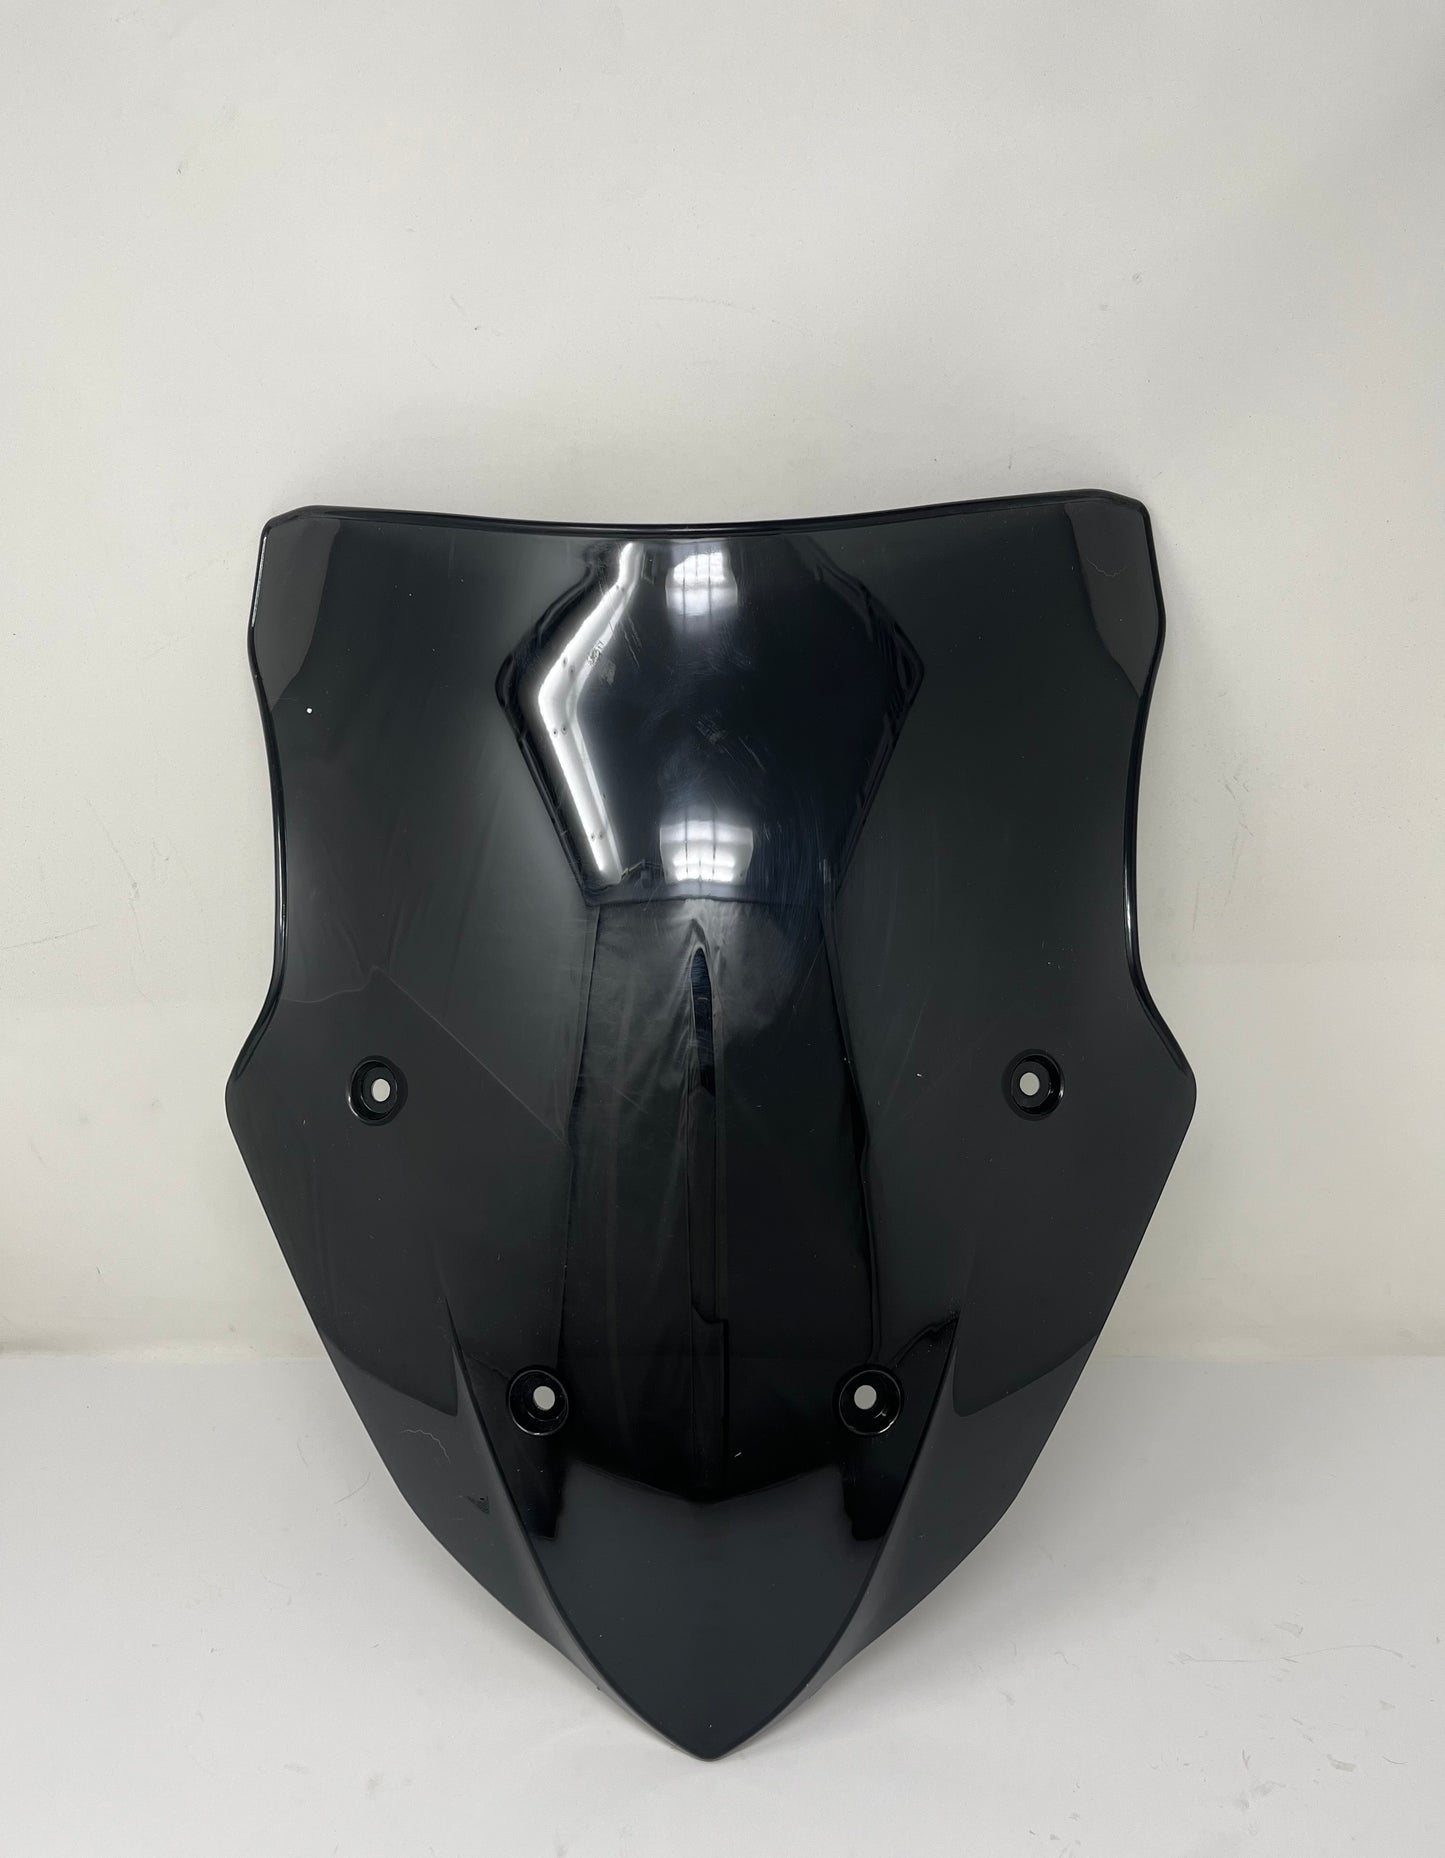 Windshield for DF250RTS for sale. Venom X22R windshield for sale.